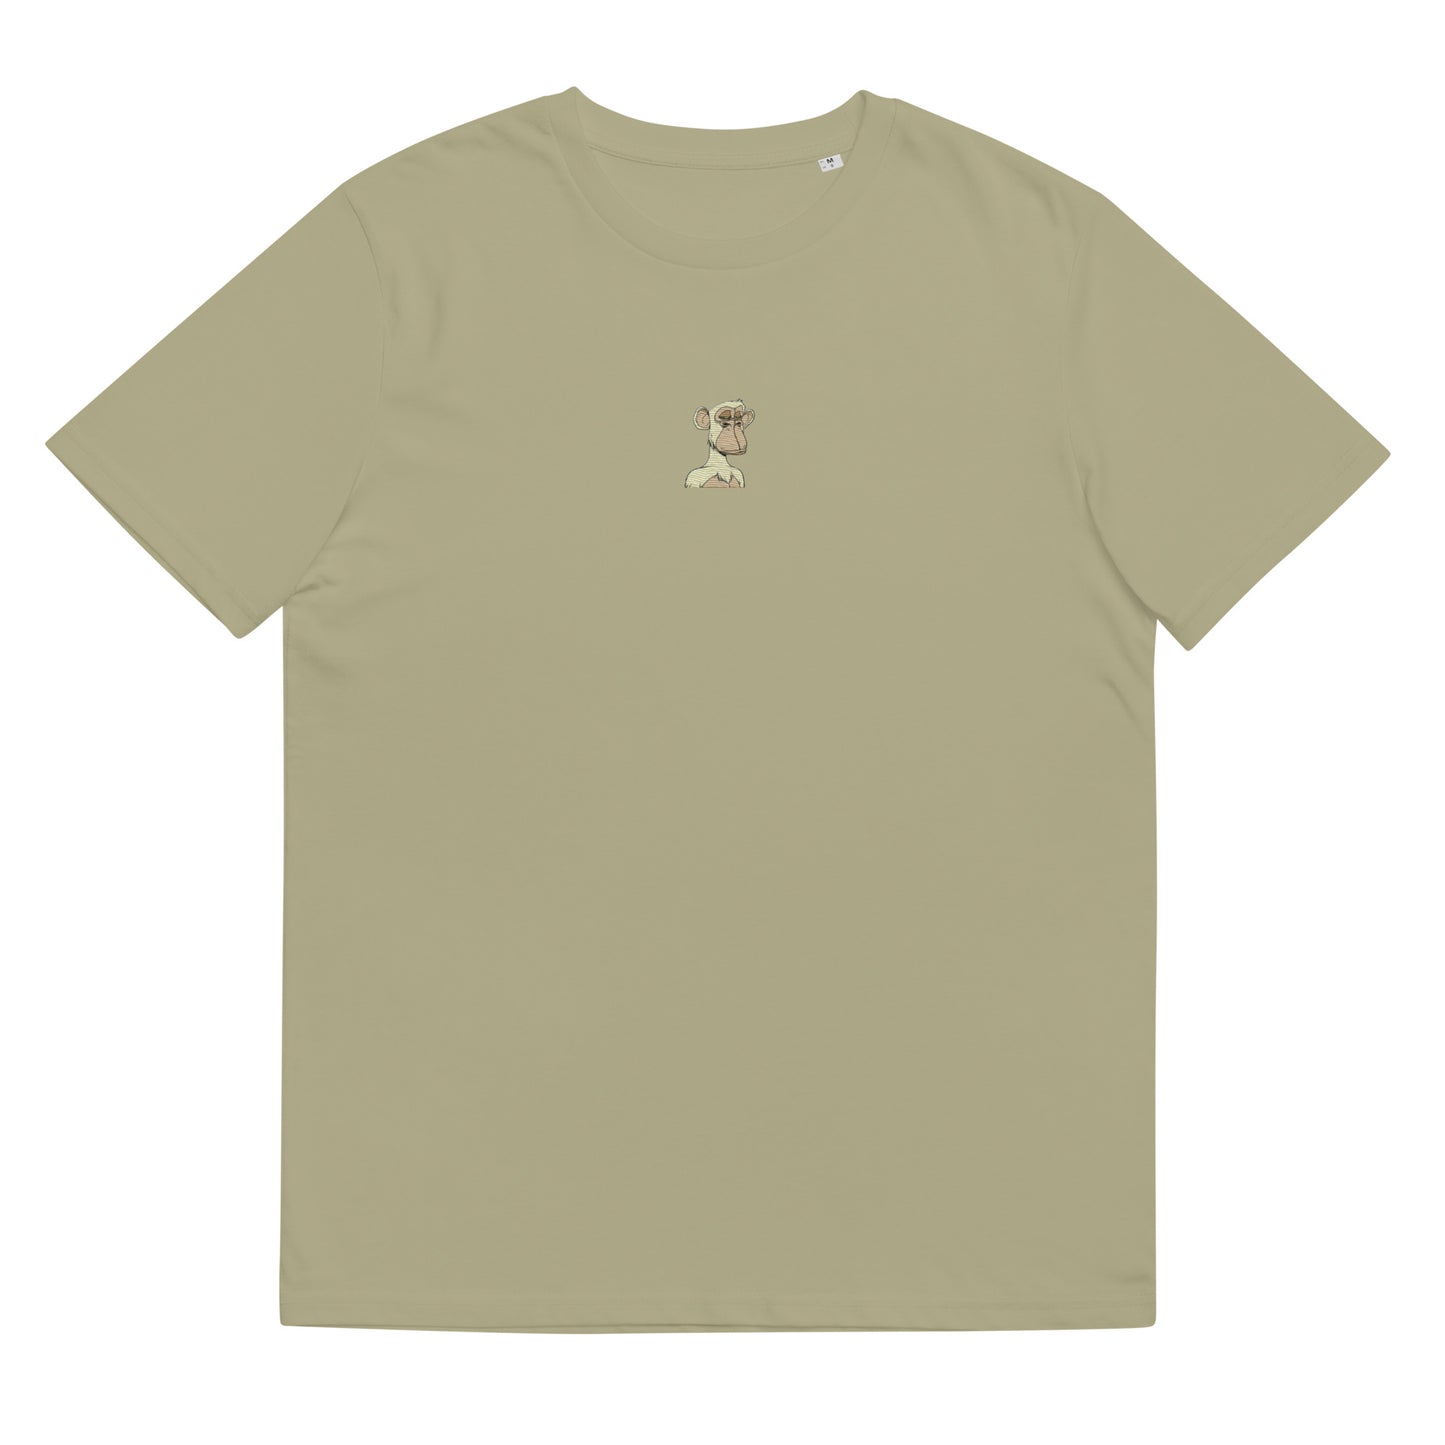 Unisex organic cotton t-shirt feat BAYC #4039 (embroidered)